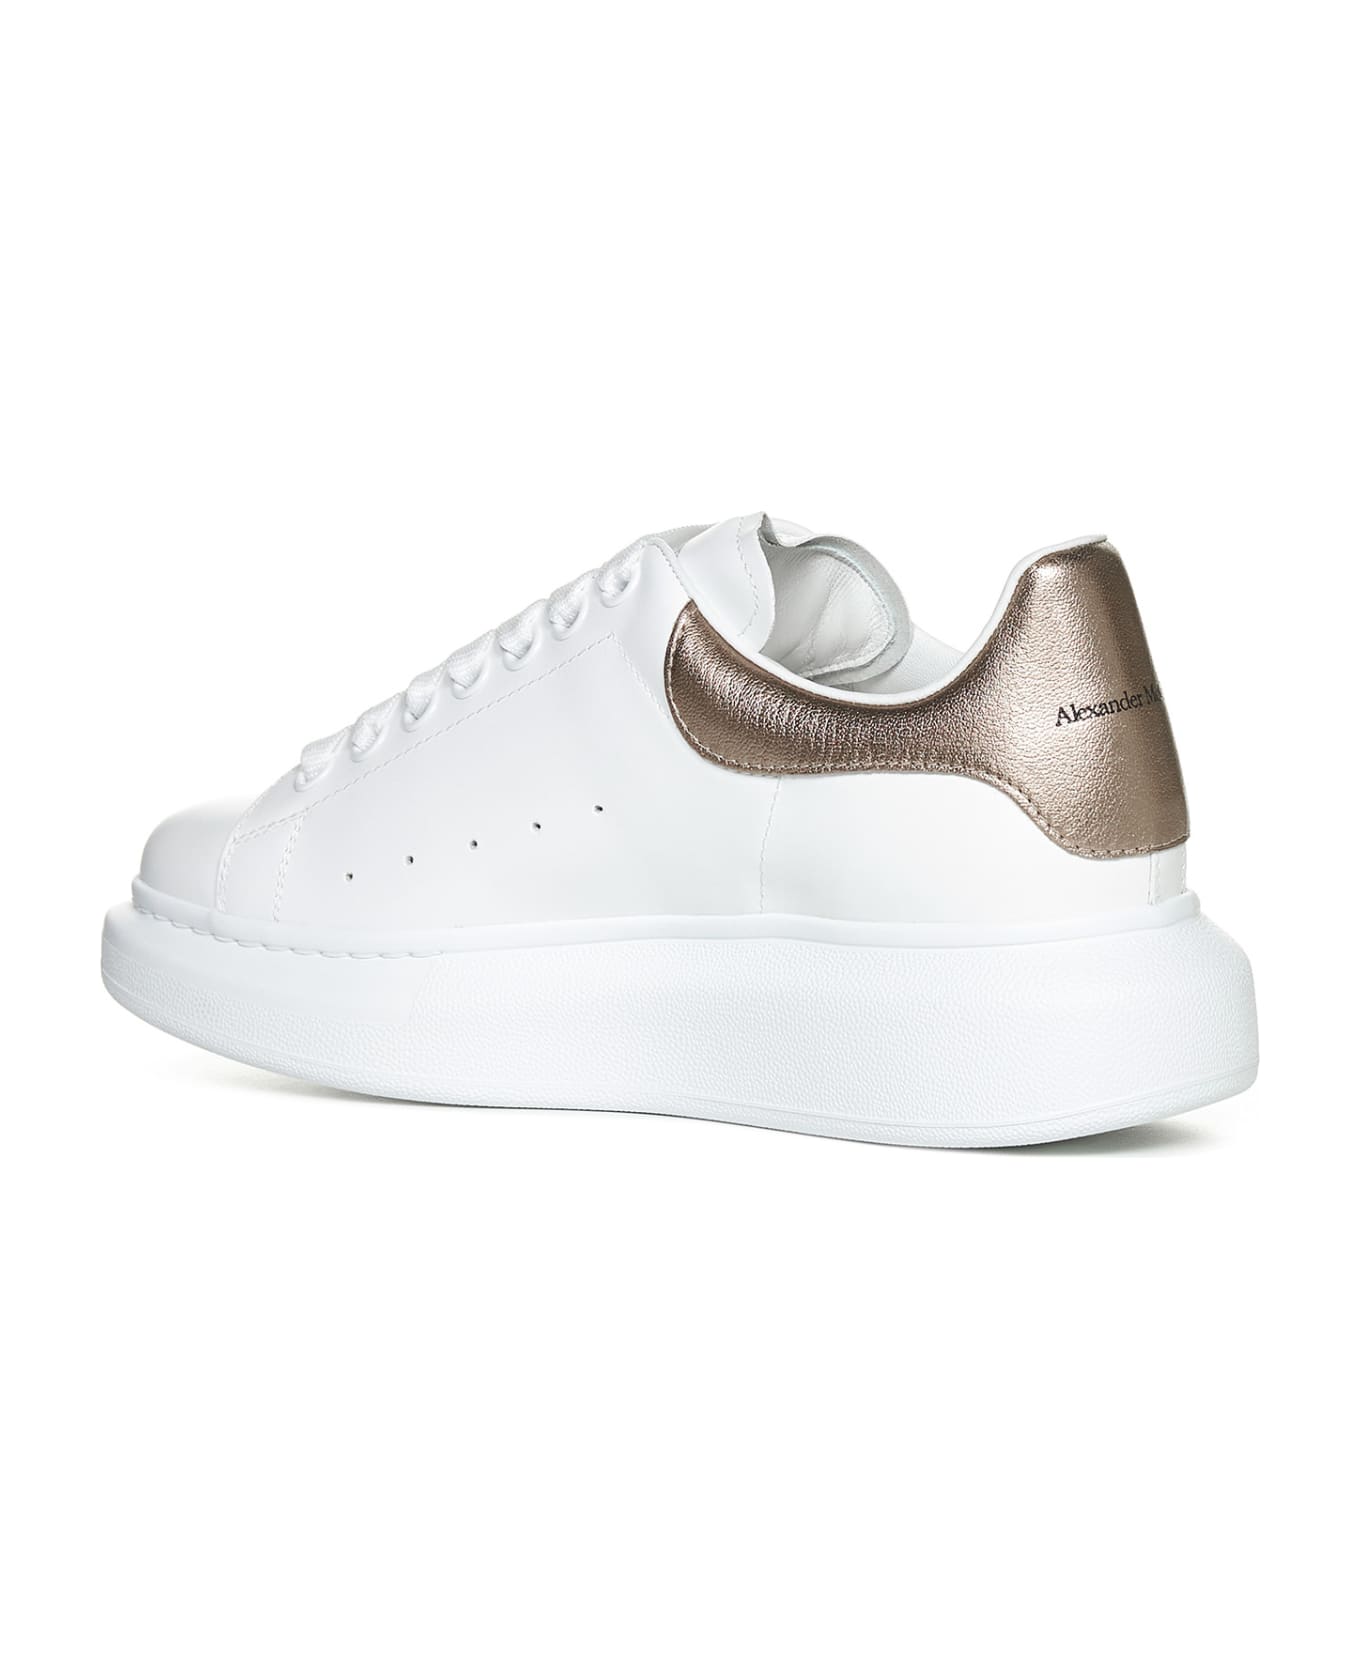 Alexander McQueen Oversized Leather Sneakers - White/rose Gold 171